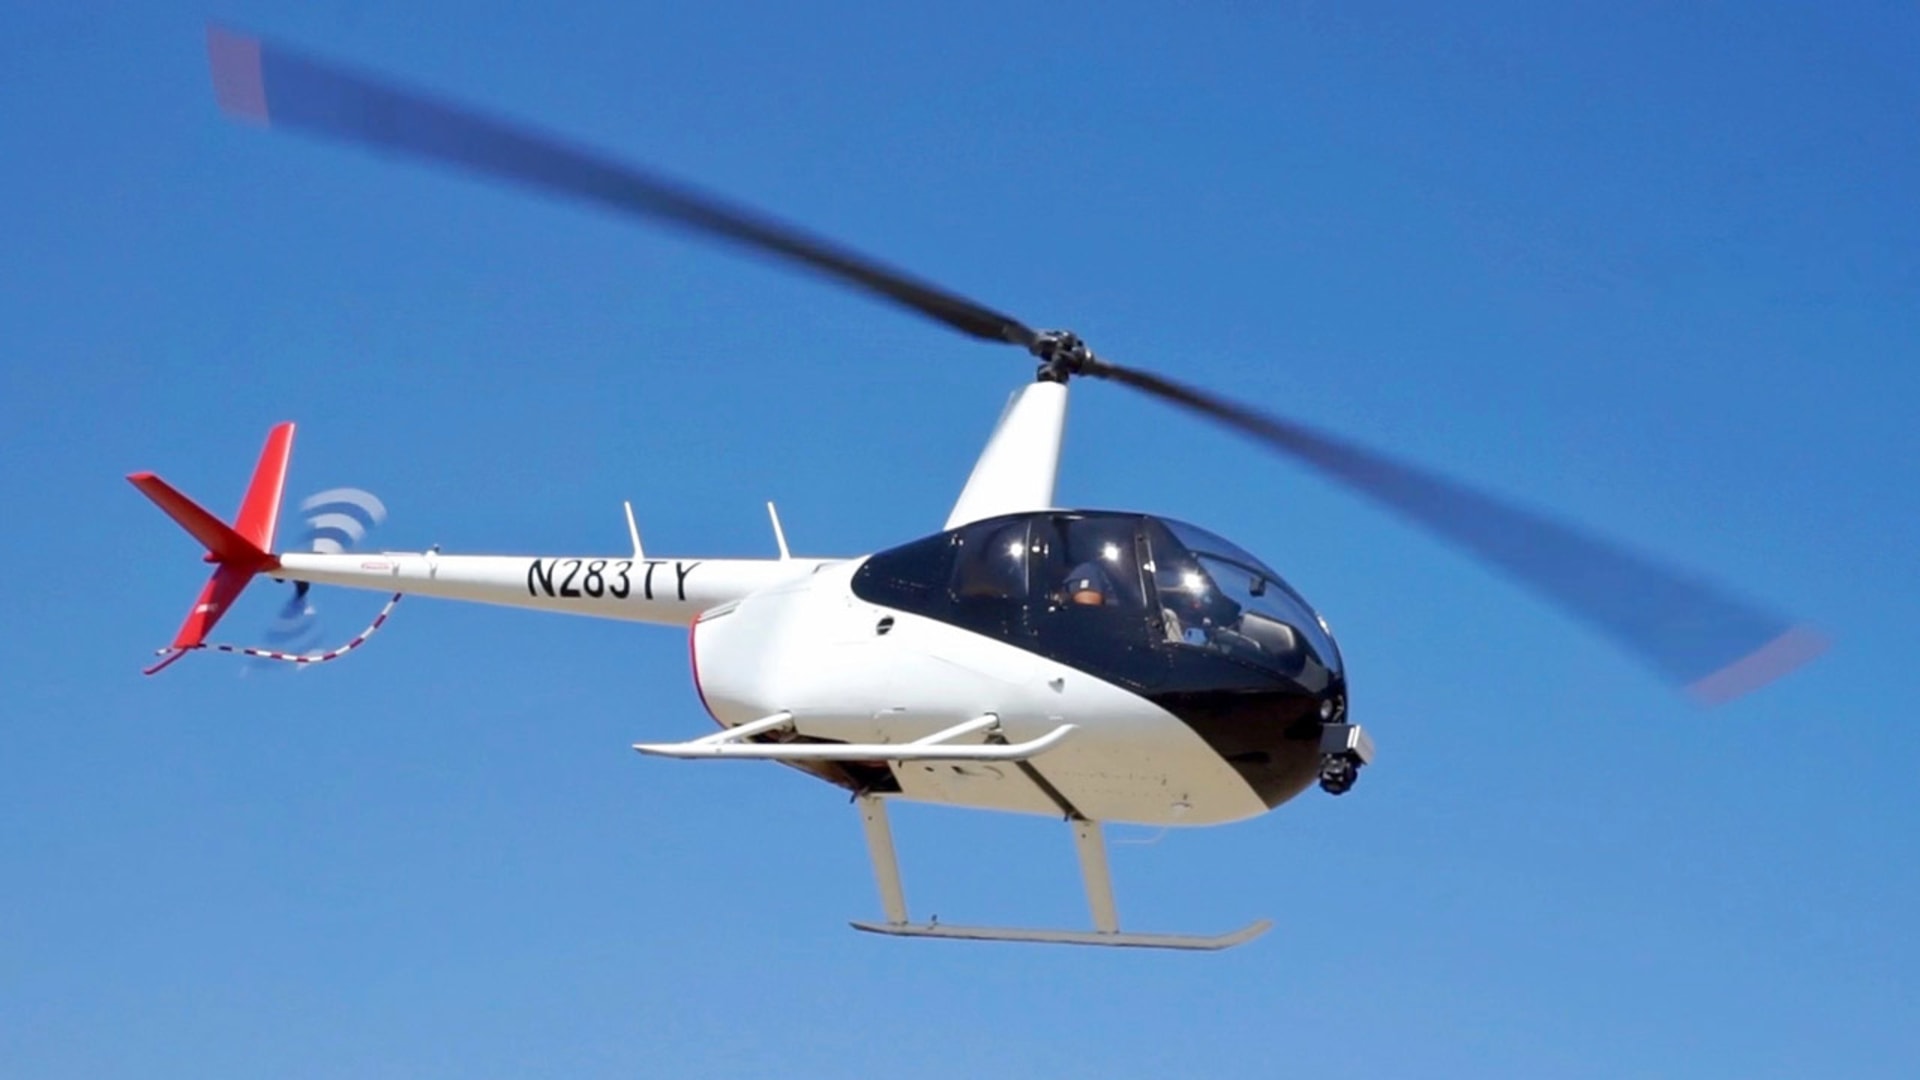 This high-tech 911 helicopter could be the next step to flying cars